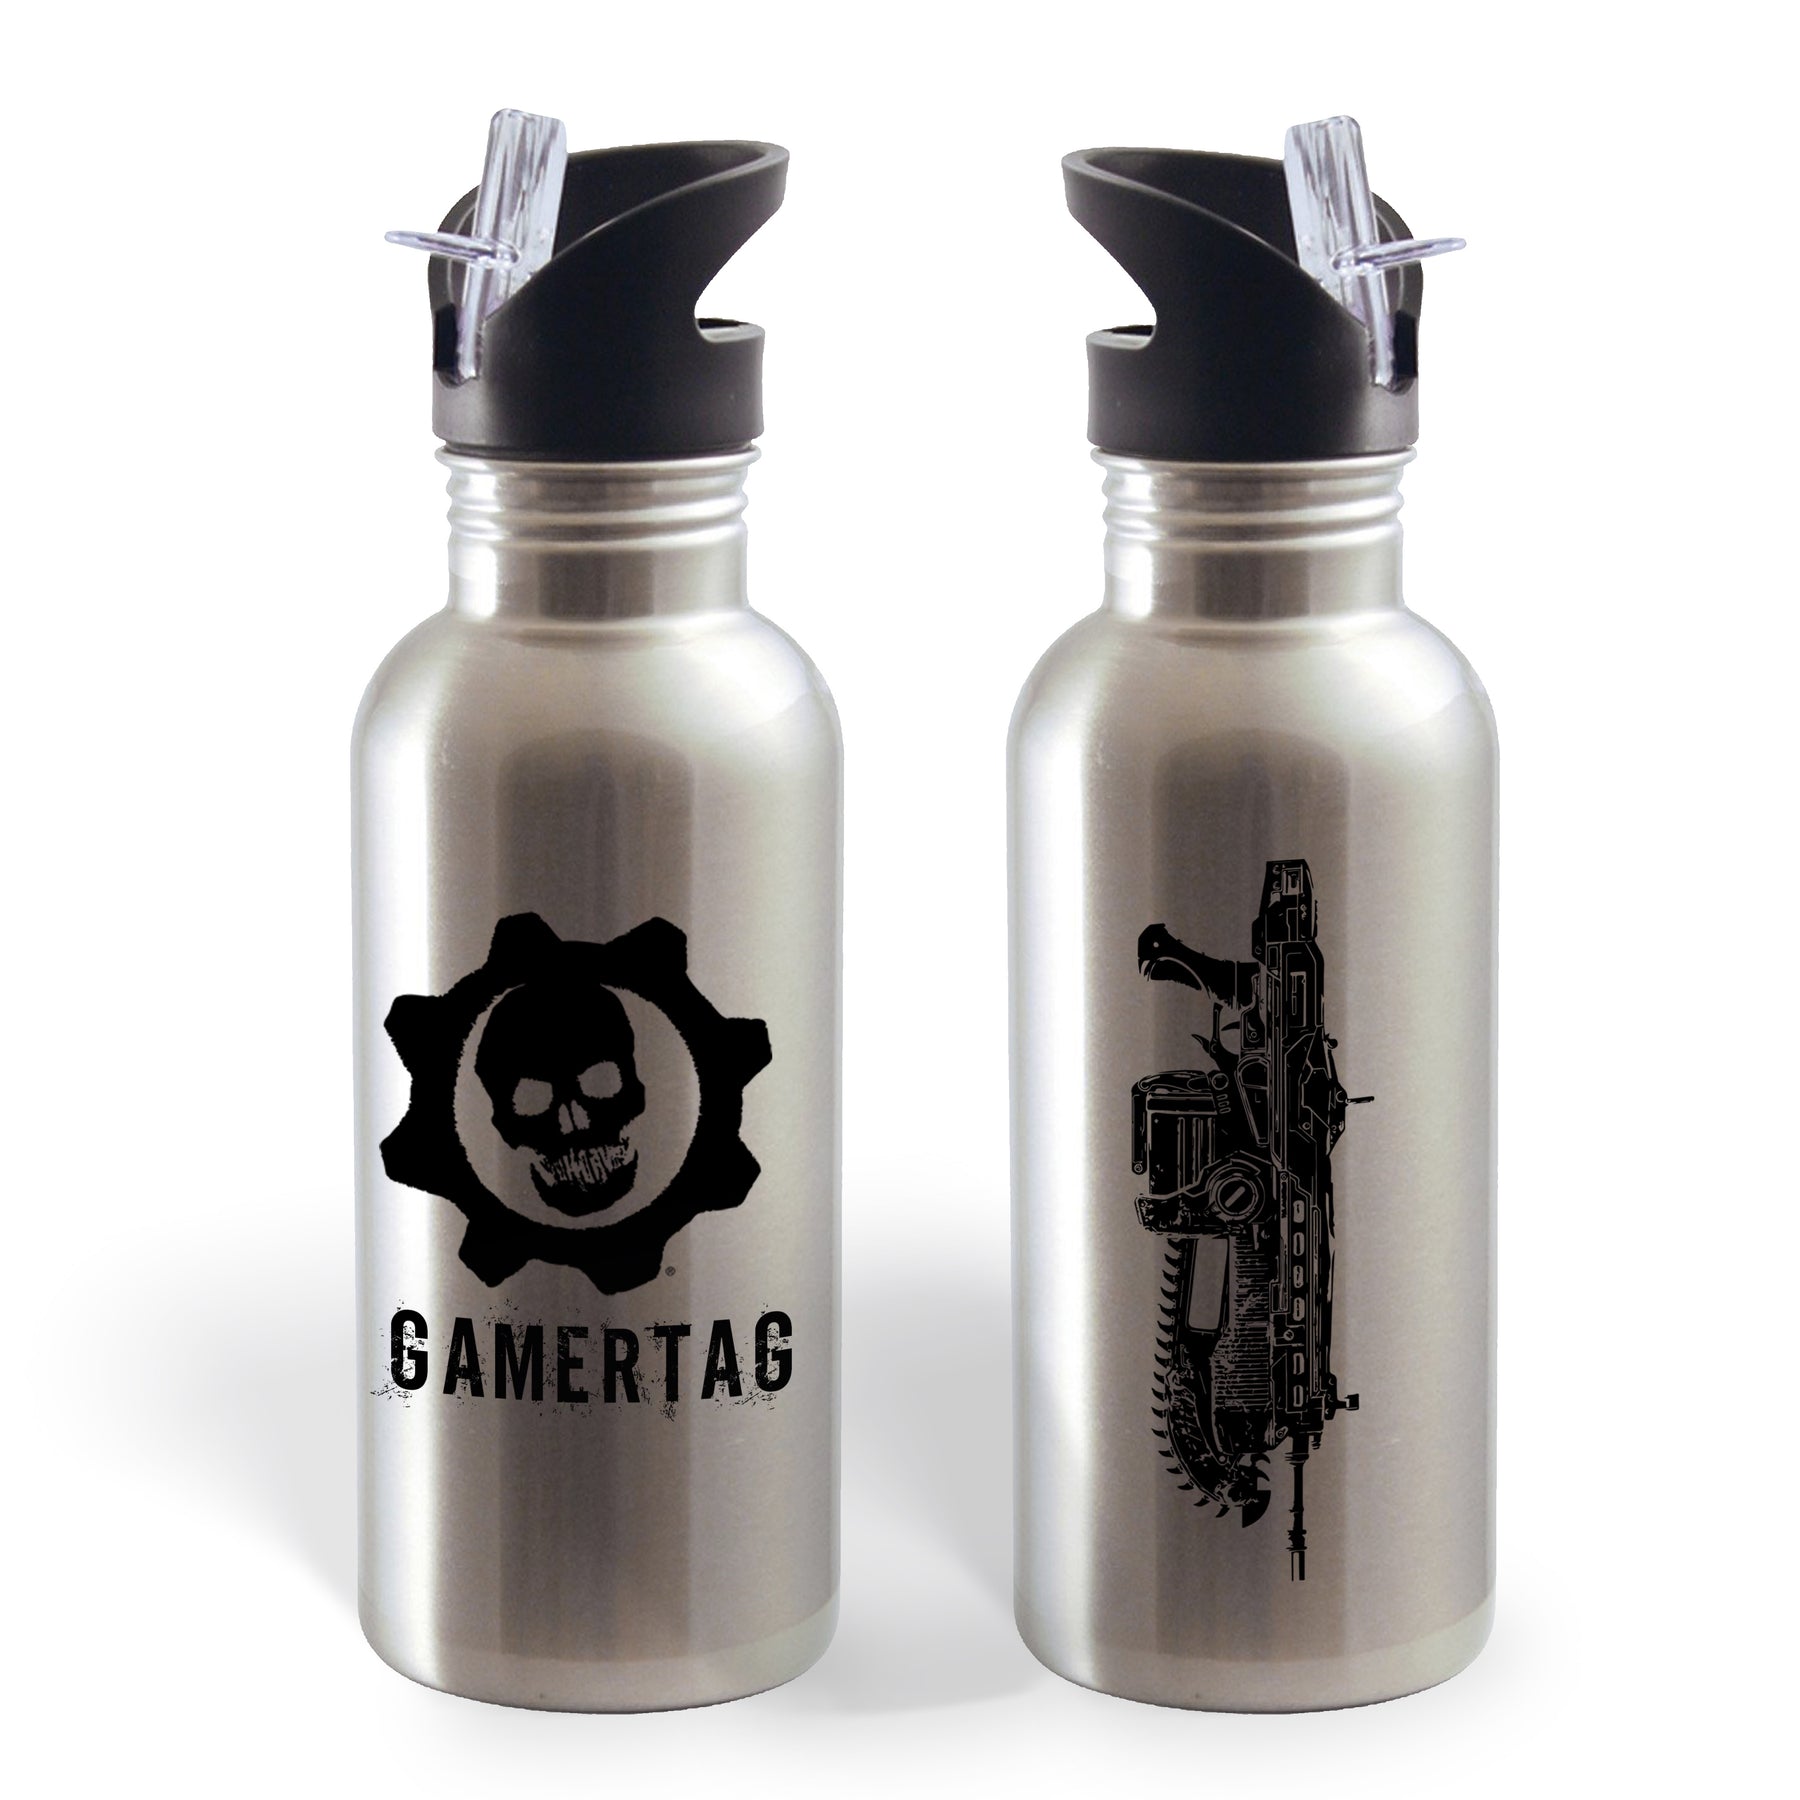 Just For Her Personalized 20 oz. Water Bottle